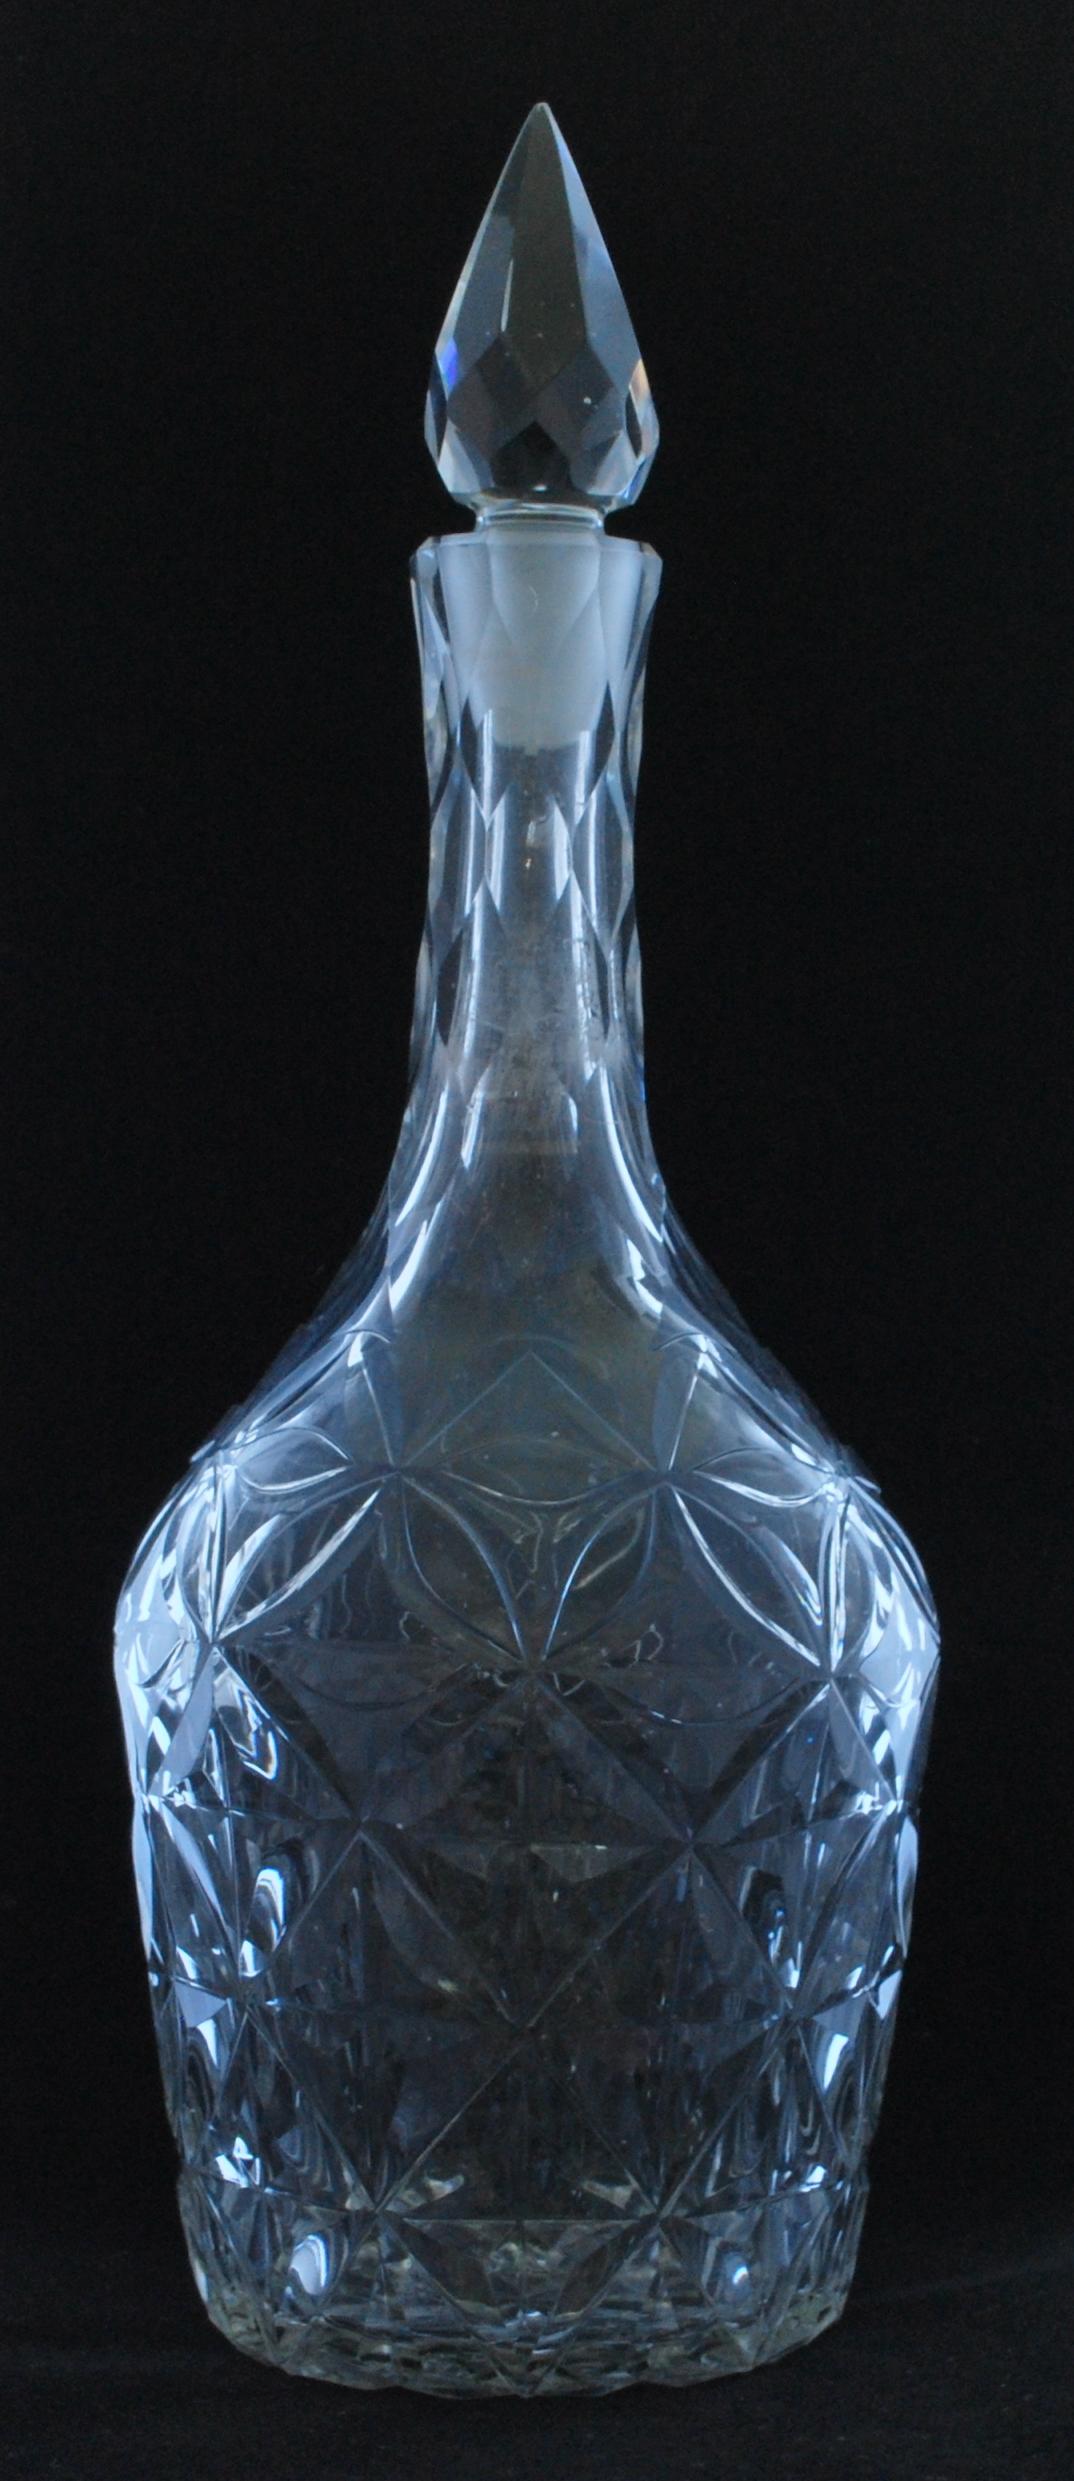 An Indian Club shaped decanter, decorated with wheel-cut interlocking circles and spire finial. Very much in the English style.